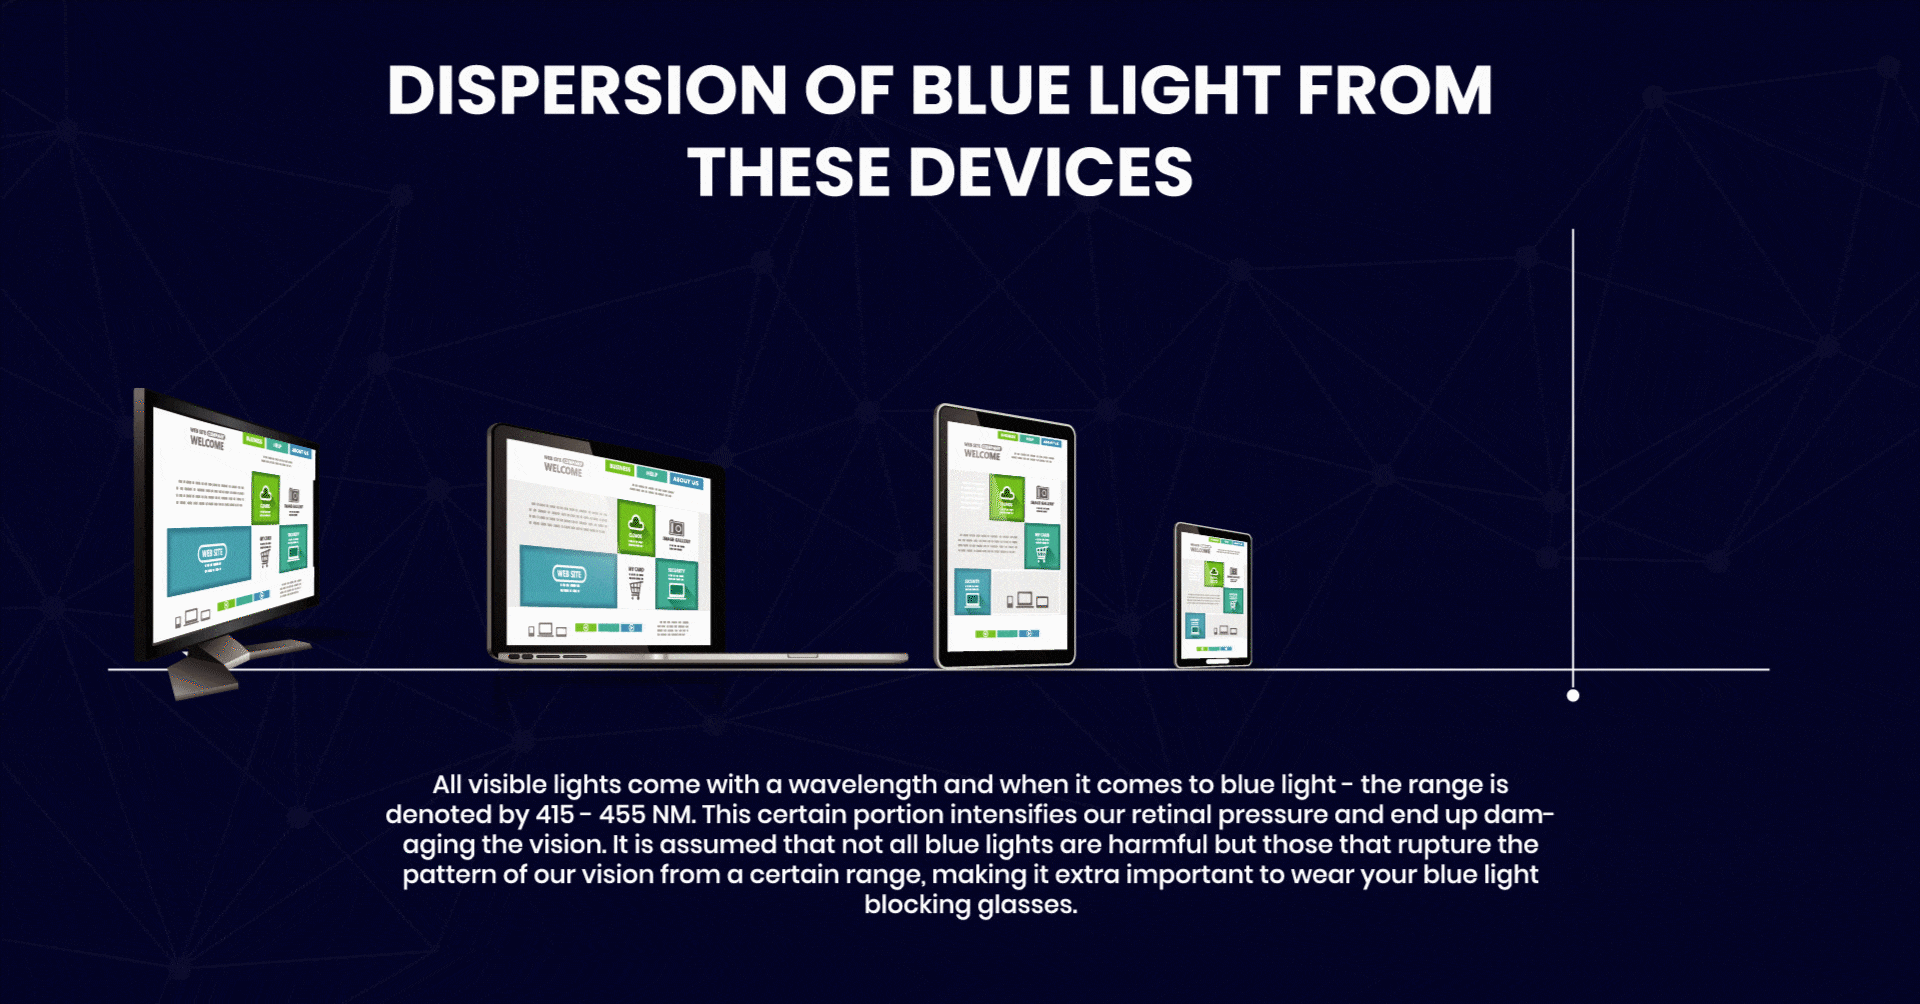 Where Does Blue Light Come From?